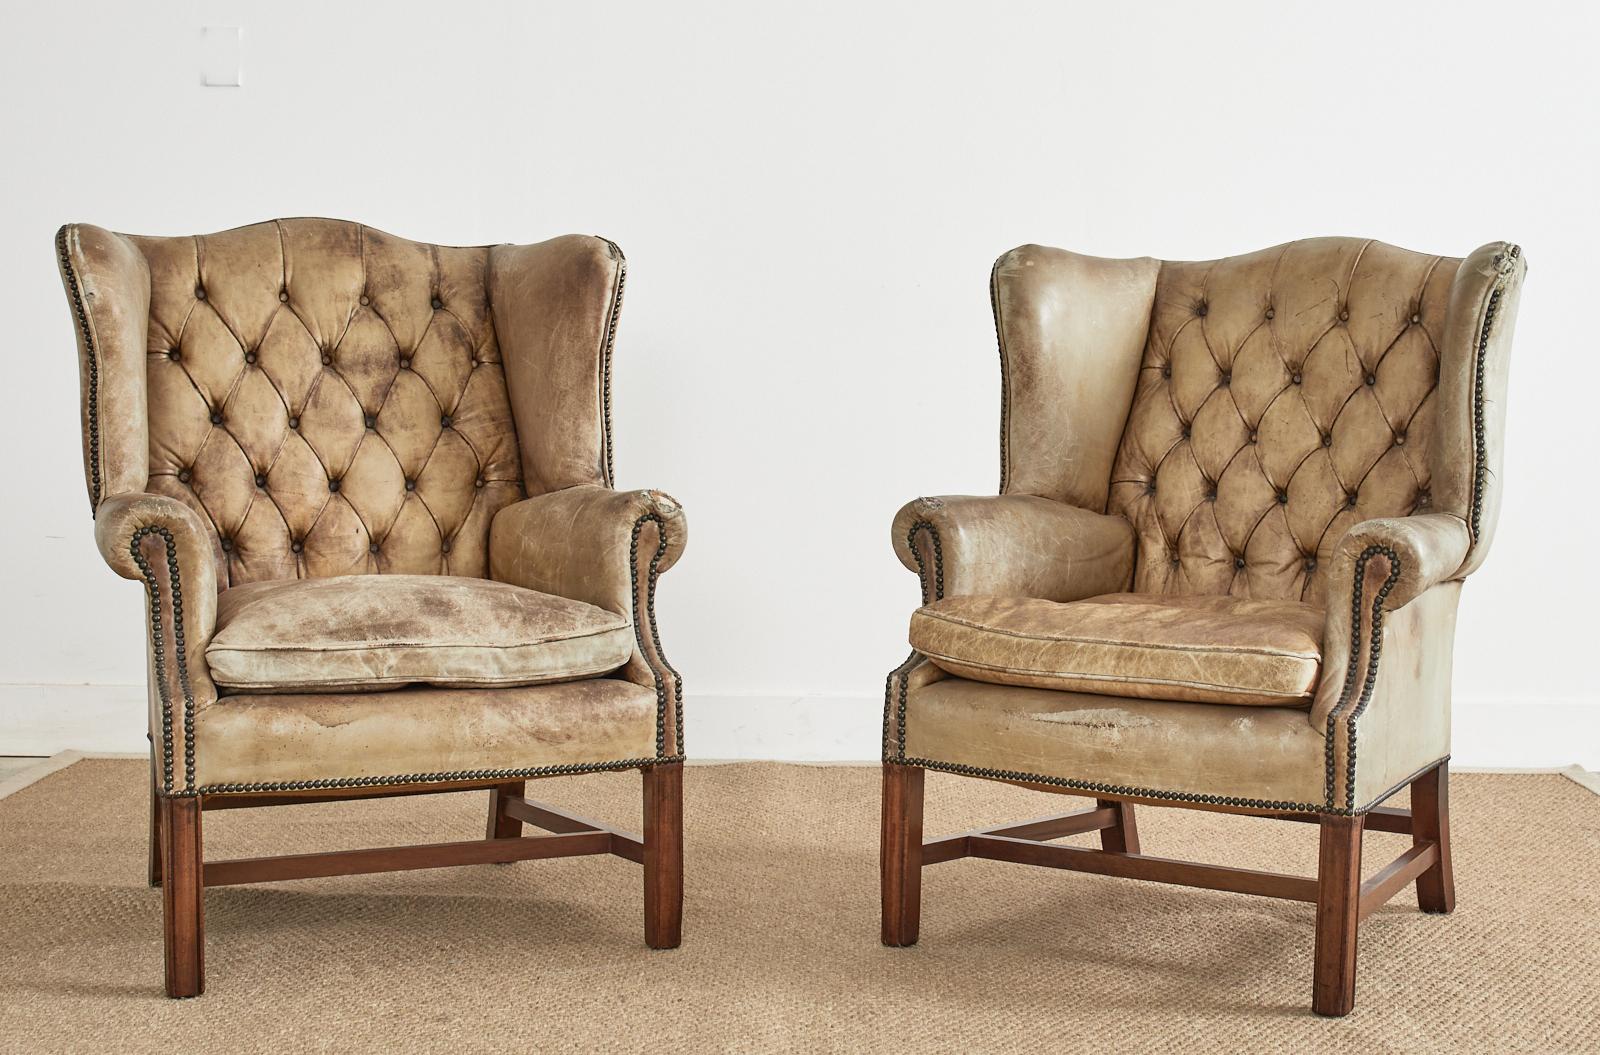 Pair of English Georgian Cigar Leather Wingback Library Chairs In Distressed Condition For Sale In Rio Vista, CA